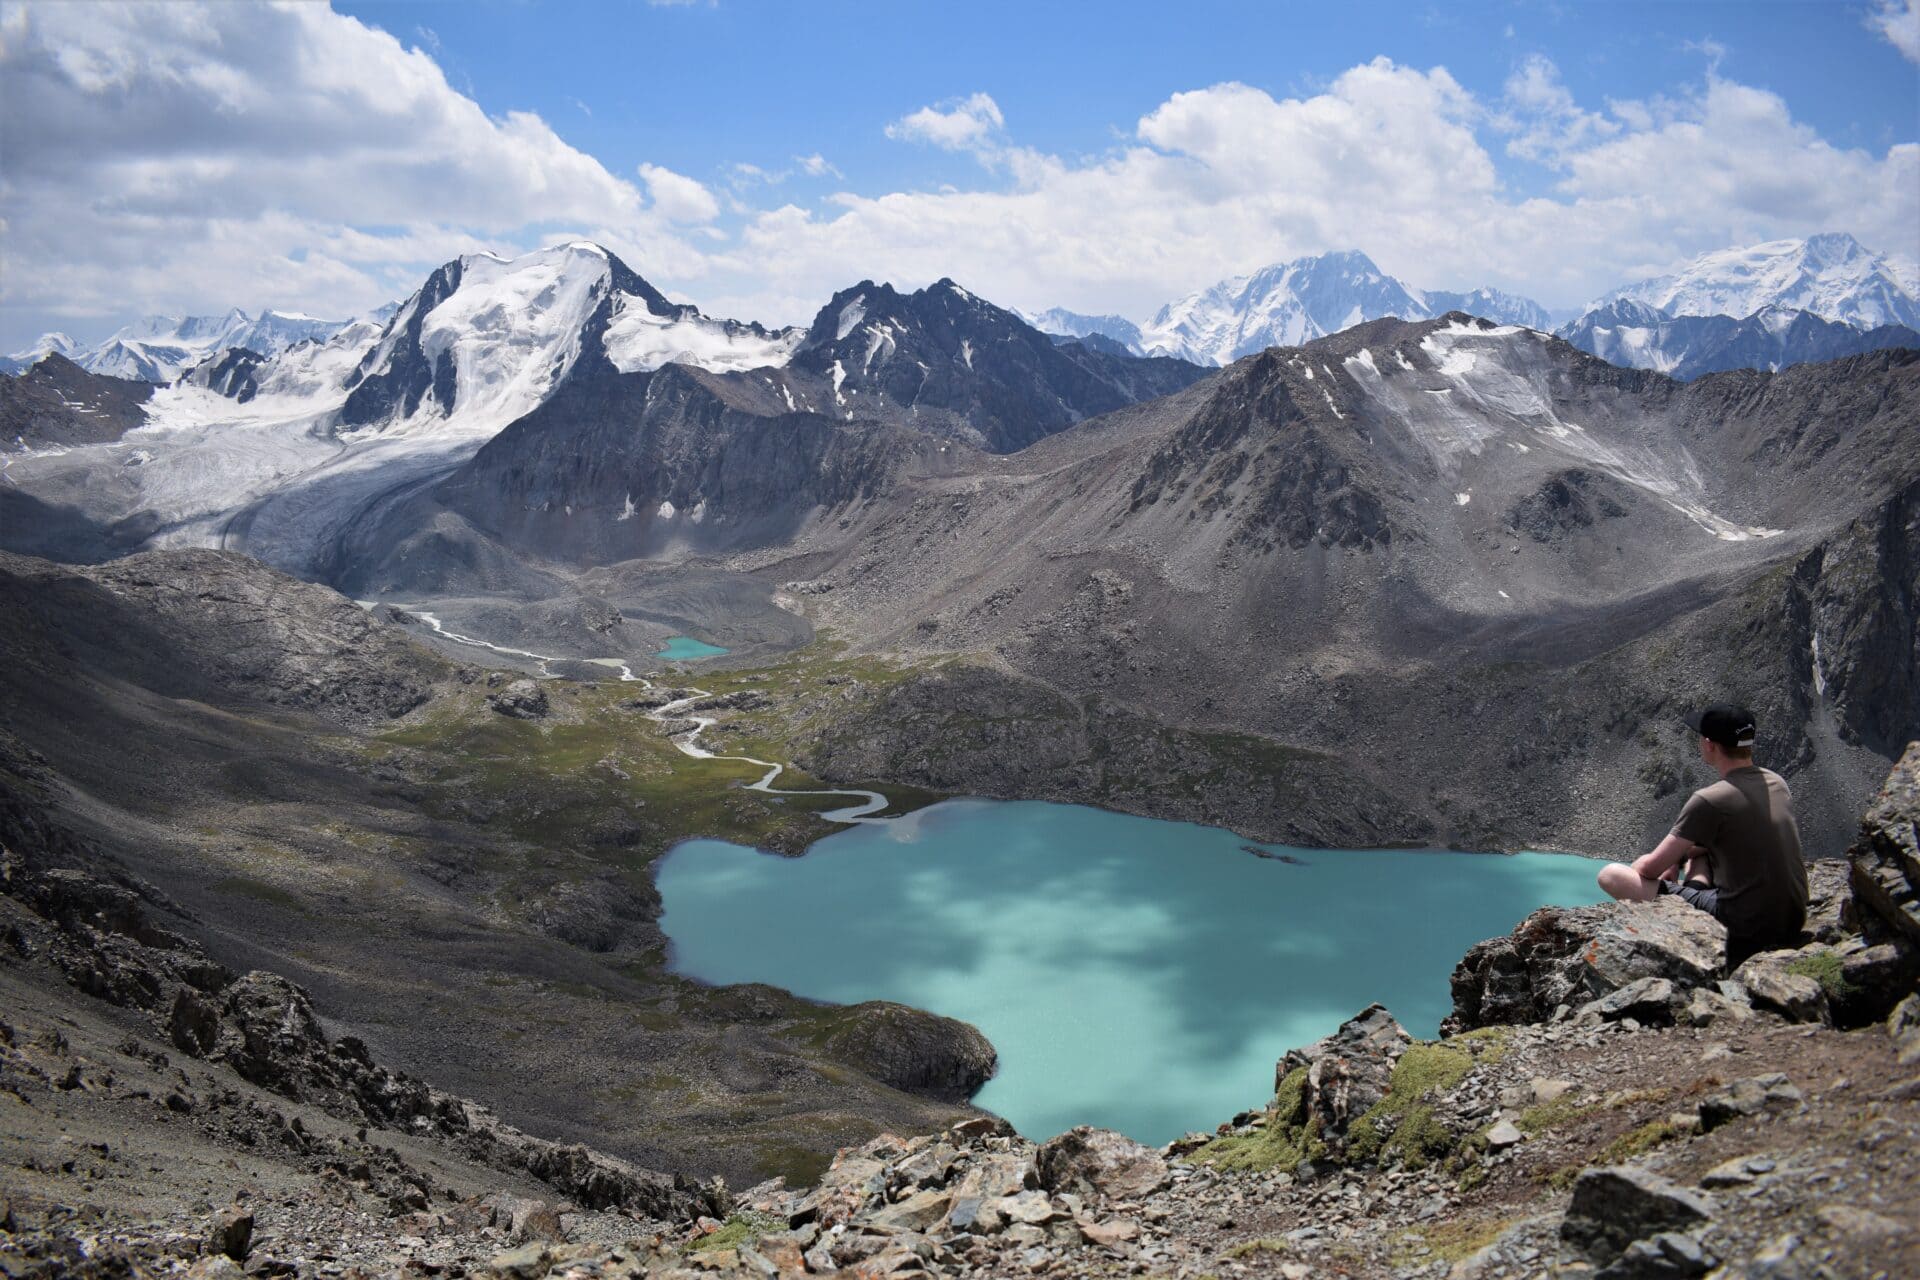 a man sitting on a rocky peak overlooking the turquoise waters of an alpine lake framed by majestic, snow-capped peaks